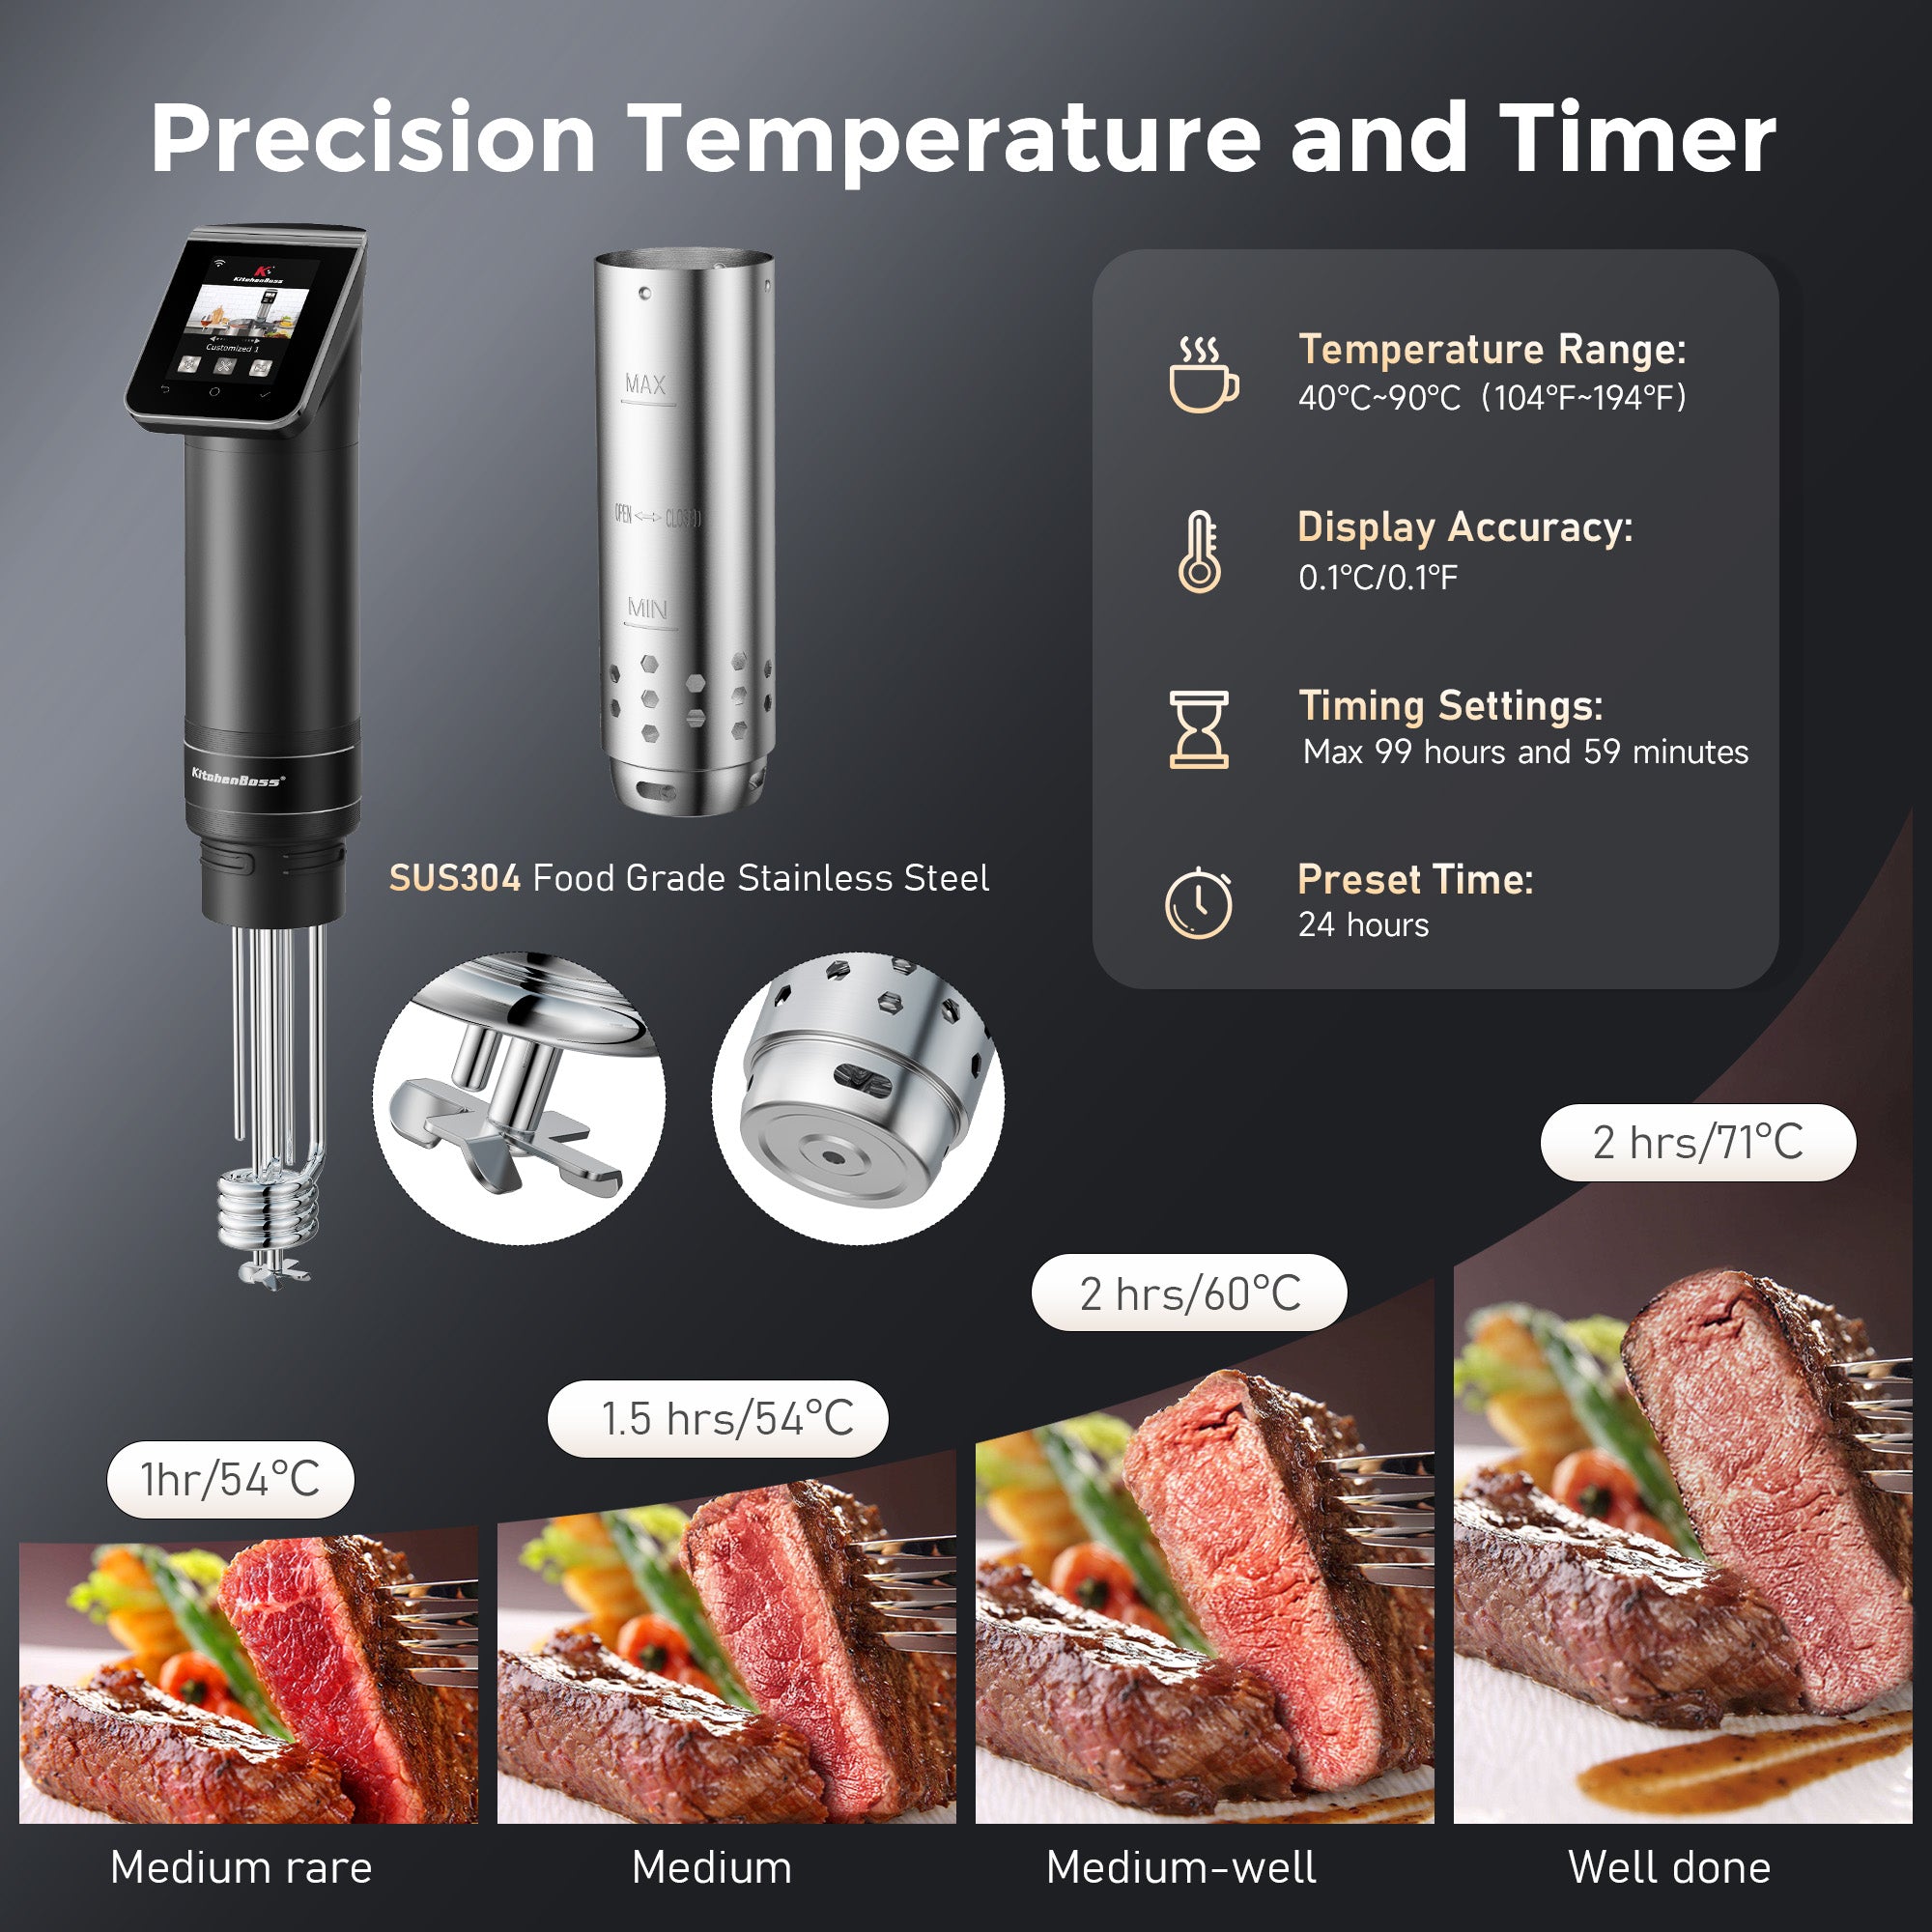 KitchenBoss WIFI Sous Vide Cooker G330: Ultra-Quiet Precision Sous-vide Cooking Machine 1100 Watts Stainless Steel Immersion Circulator for Kitchen with TFT Preset Recipes, Black